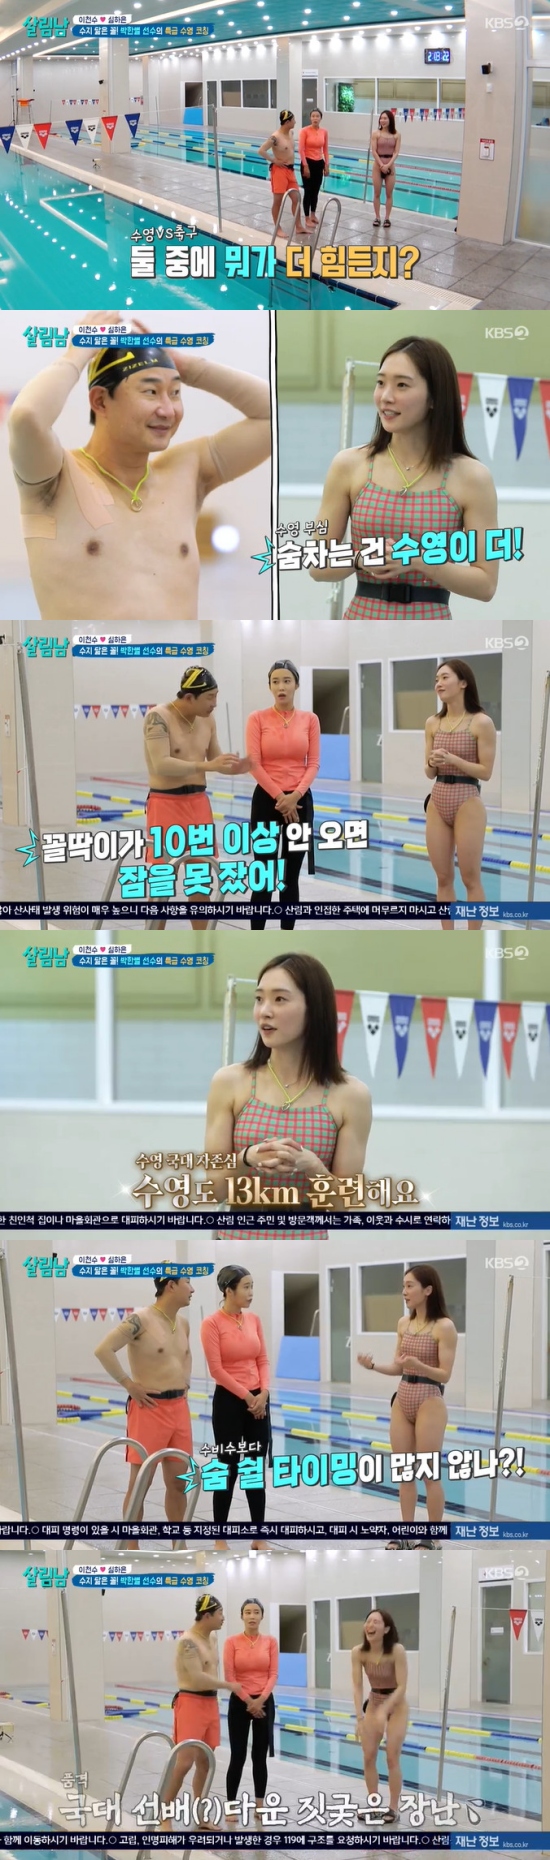 Former Soccer Athlete Lee Chun-soo got into a war of nerves with Sooyoung Athlete Park Han-byulLee Chun-soo and Shim Ha-eun learned Park Han-byul Athletes Sooyoung in KBS 2TV Salim mens season 2 (hereinafter referred to as salim nam2) broadcast on the 15th.Lee Chun-soo said, Why is the water dangerous and why do you take it? Lee said, Its fun.Lee Chun-soo said, Its a waste of time. How much do you have to play?Lee Chun-soo said, Father can not do Sooyoung Water is scary. If it is a bad situation, Father can not help you.In the water, he confessed.Lee Chun-soo said in an interview with the production team, I have a promulgation of water, so if I go to the water enough to have a trauma, I sweat. If there is one thing I can not do, it is Sooyoung I do not know the floating system itself.I have never practiced it, and Incheon is called the sea, but when you look at Incheon, there are many land. It is the king of Incheon, but it is on the land side.In the end, Lee Chun-soo decided to overcome water promulgation and learned Earth 2 Sooyoung from Jung Dong-nam, a lifeguard.Lee Chun-soo was able to get acquainted with the water thanks to Jung Dong-nam, and decided to learn Sooyoung skills in earnest and went to Park Han-byul Athlete with Shim Ha-eun.Shim Ha-eun admired Park Han-byul Athletes beauty and praised her, saying, Shes pretty, shes very clear to look at, and shes very famous on Instagram.Lee Chun-soo said, I learned Earth 2 Sooyoung enough to cross the Pacific Ocean yesterday, and the water is not as scary as before, so I want to learn Sooyoung properly.When the children go to the sea or something like this, Father should know Sooyoung Shim Ha-eun asked, Is Sooyoung difficult? Is soccer difficult? and Park Han-byul Athlete expressed his pride, saying, Is Sooyoung more difficult?Lee Chun-soo said, Ive lived my life as a scoundrel. I always run on the mountain and run on the playground. If I dont get scoundrels more than 10 times a day, I cant sleep.Park Han-byul Athlete said, We play Sooyoung about 13km in practice.In particular, Park Han-byul Athlete provoked, saying, Hes a striker, but he has more timing to breathe than defense, and Lee Chun-soo suspected, Have you ever met Athlete in soccer? Isnt he Athlete in boyfriend football?Picture = KBS broadcast screen